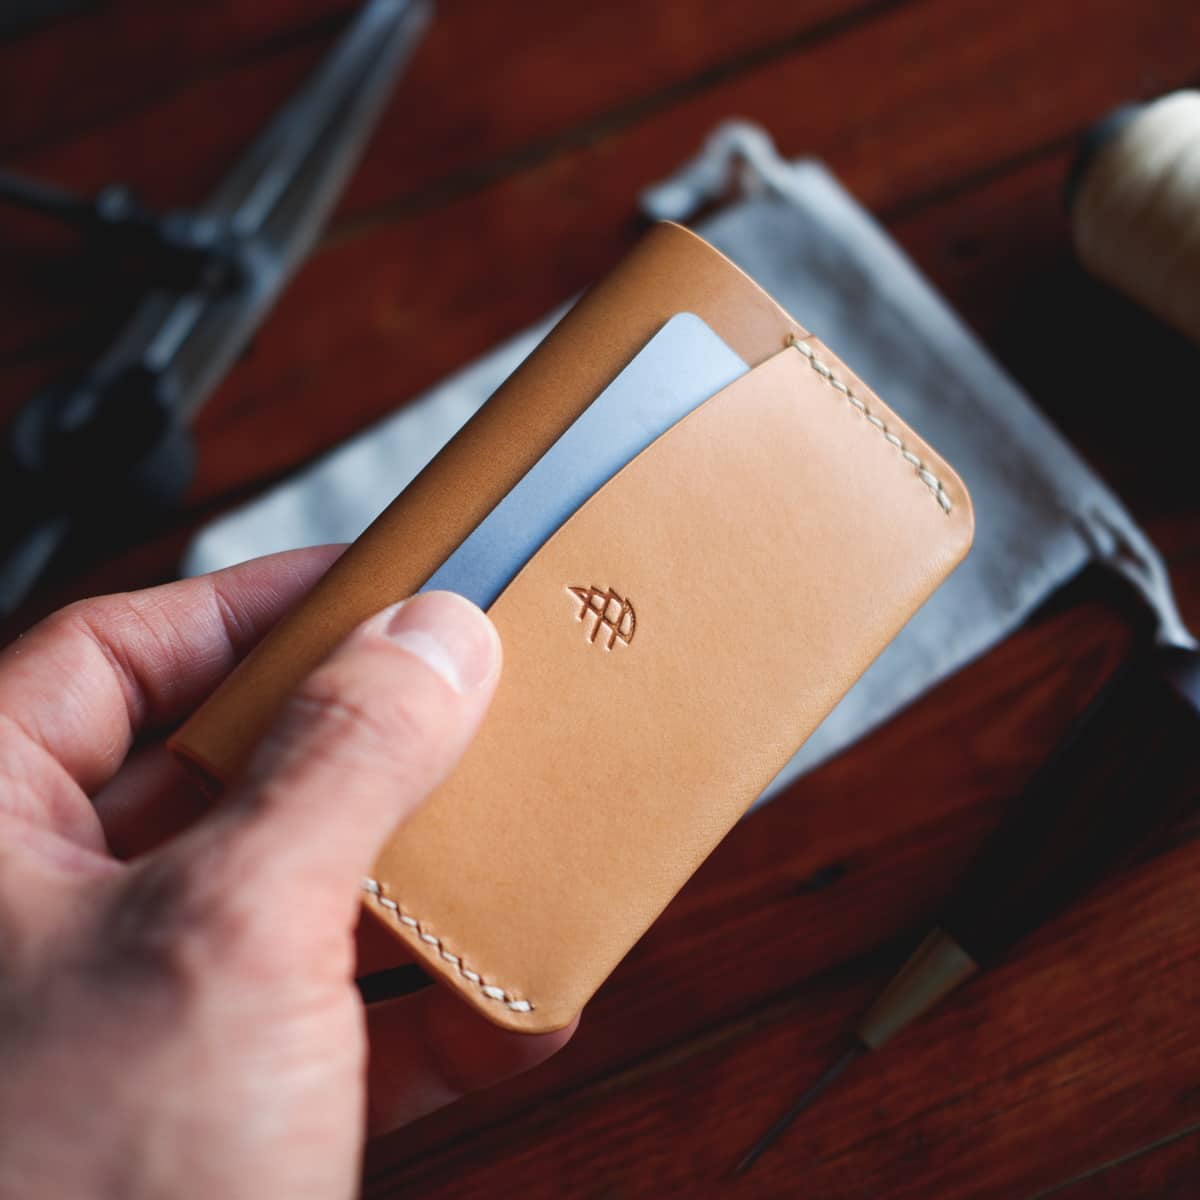 The Mountain Snap Wallet in Natural/Biscuit Buttero vegetable tanned leather - back side with quick draw pocket and credit card inserted